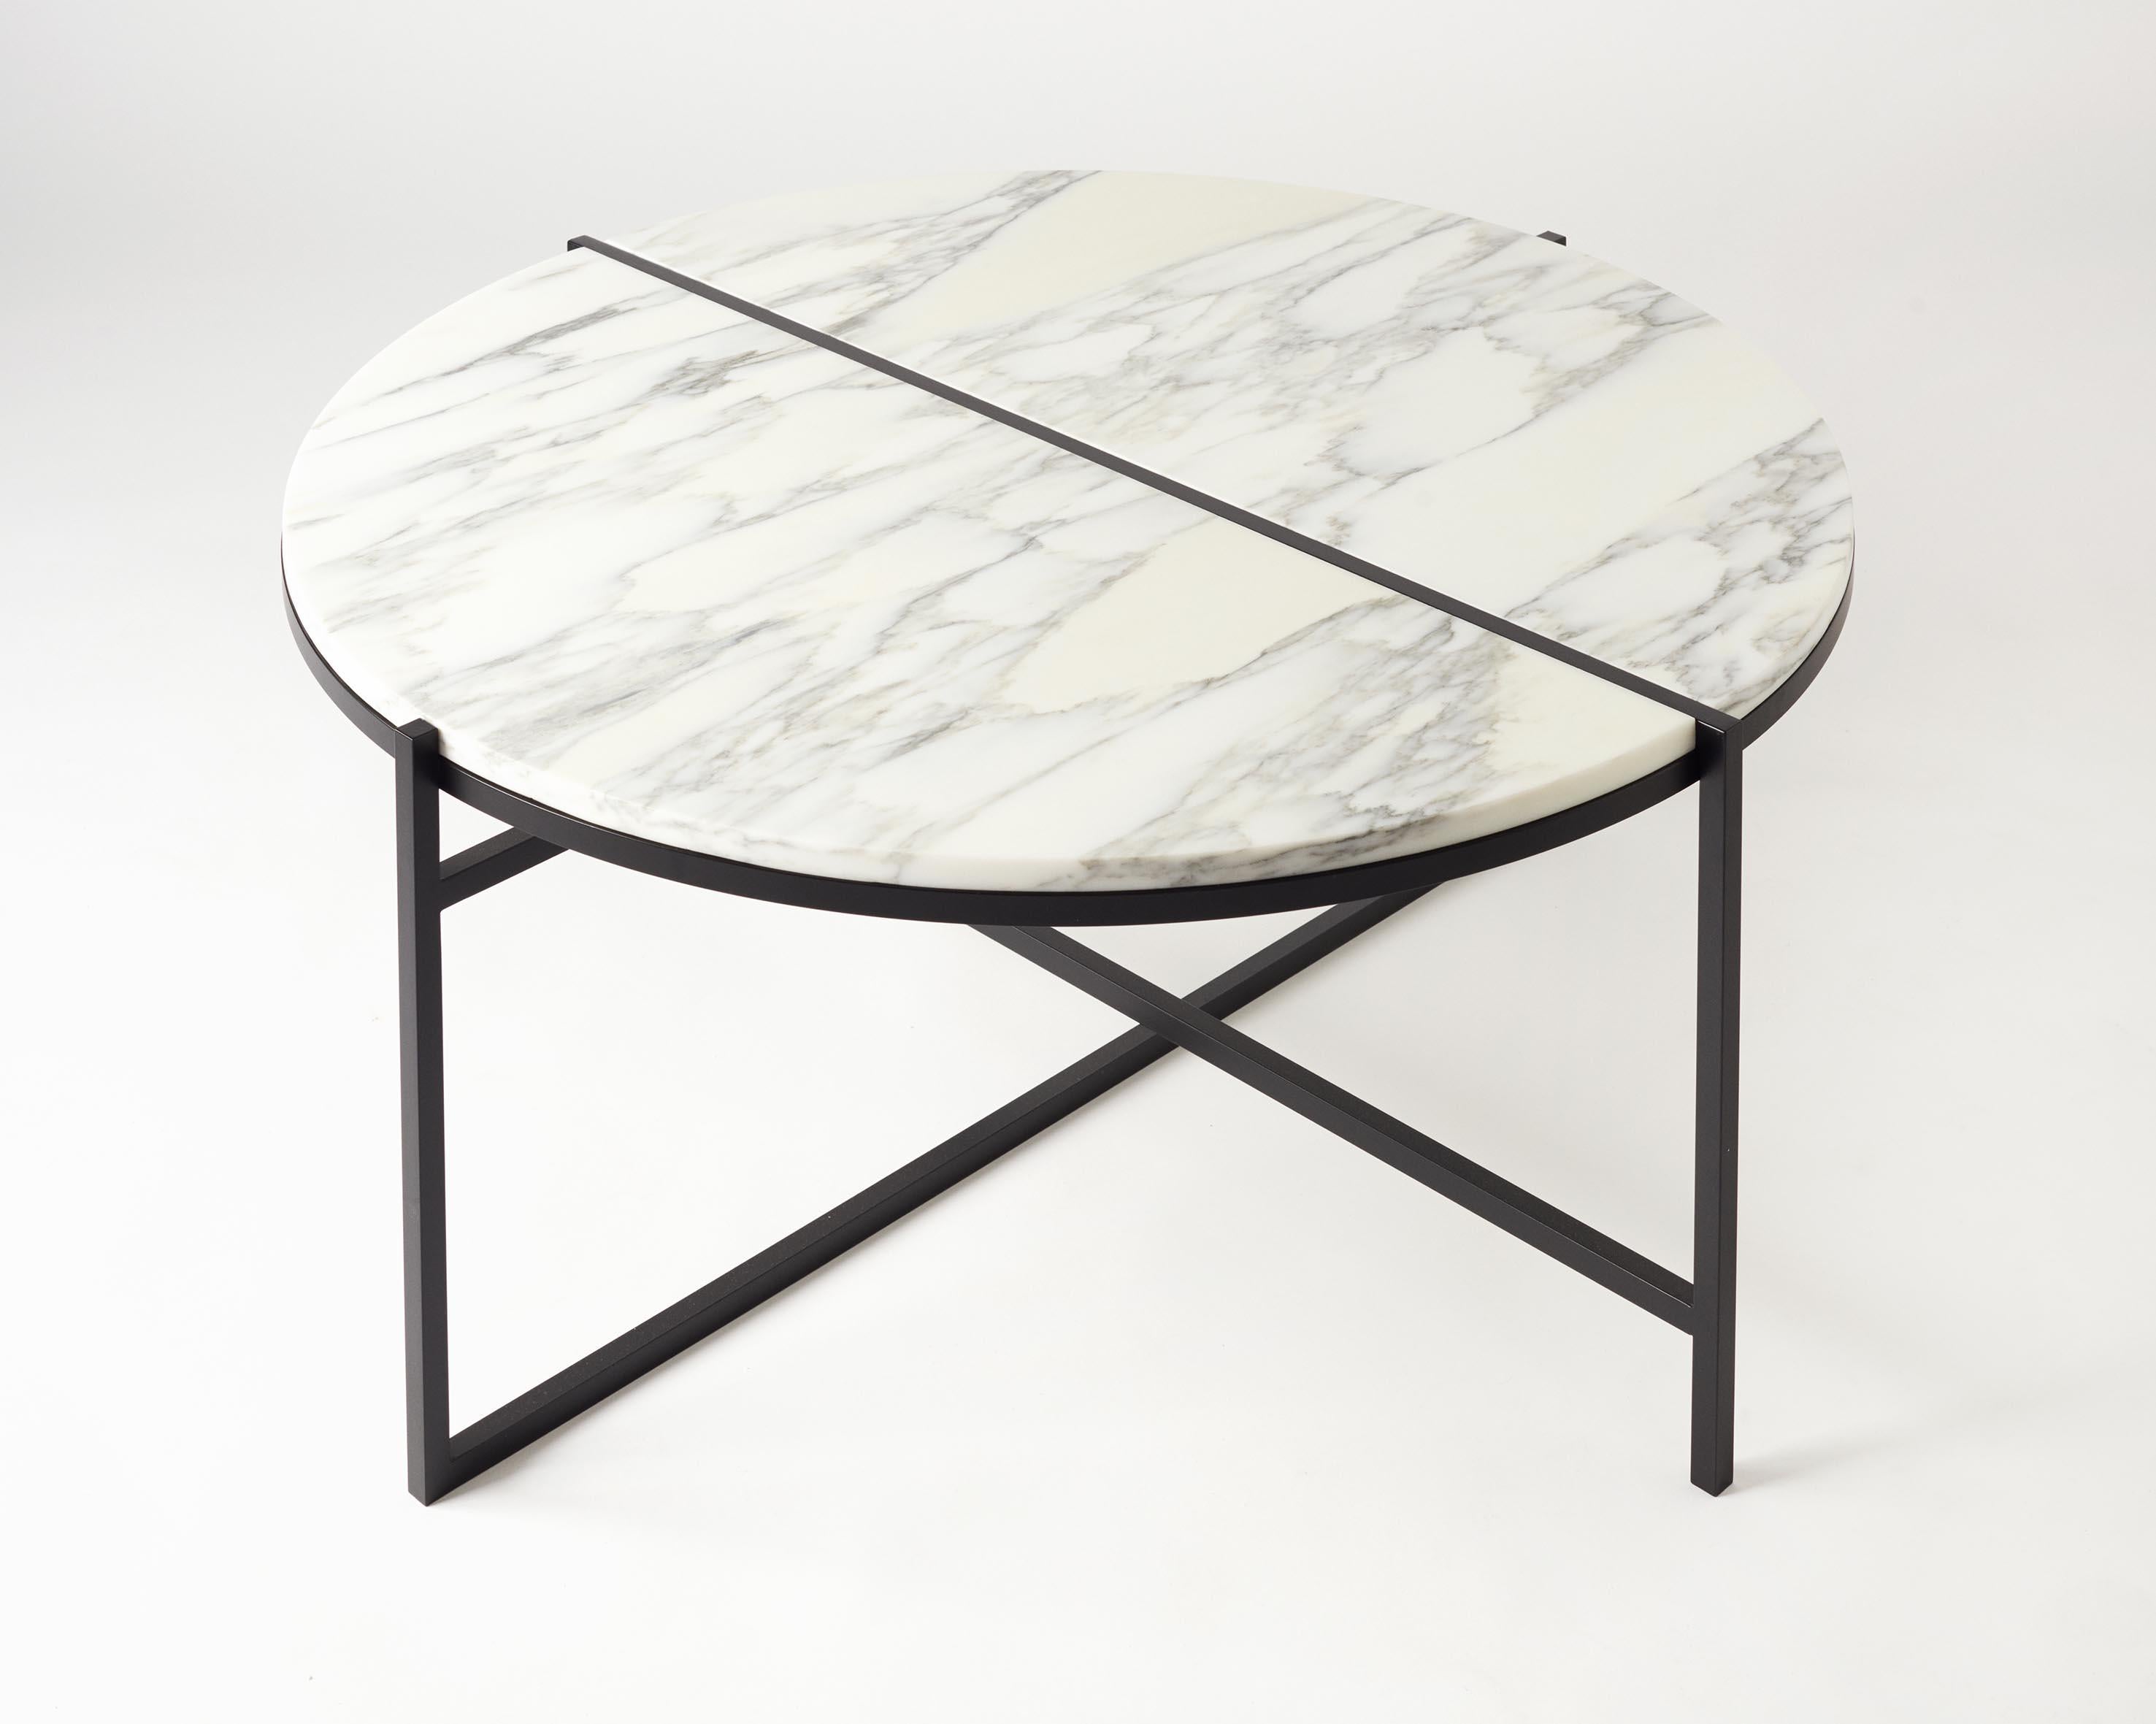 Polished Contemporary Coffee Table Bianco Arabescato Marble Minimalist Modern Unique For Sale